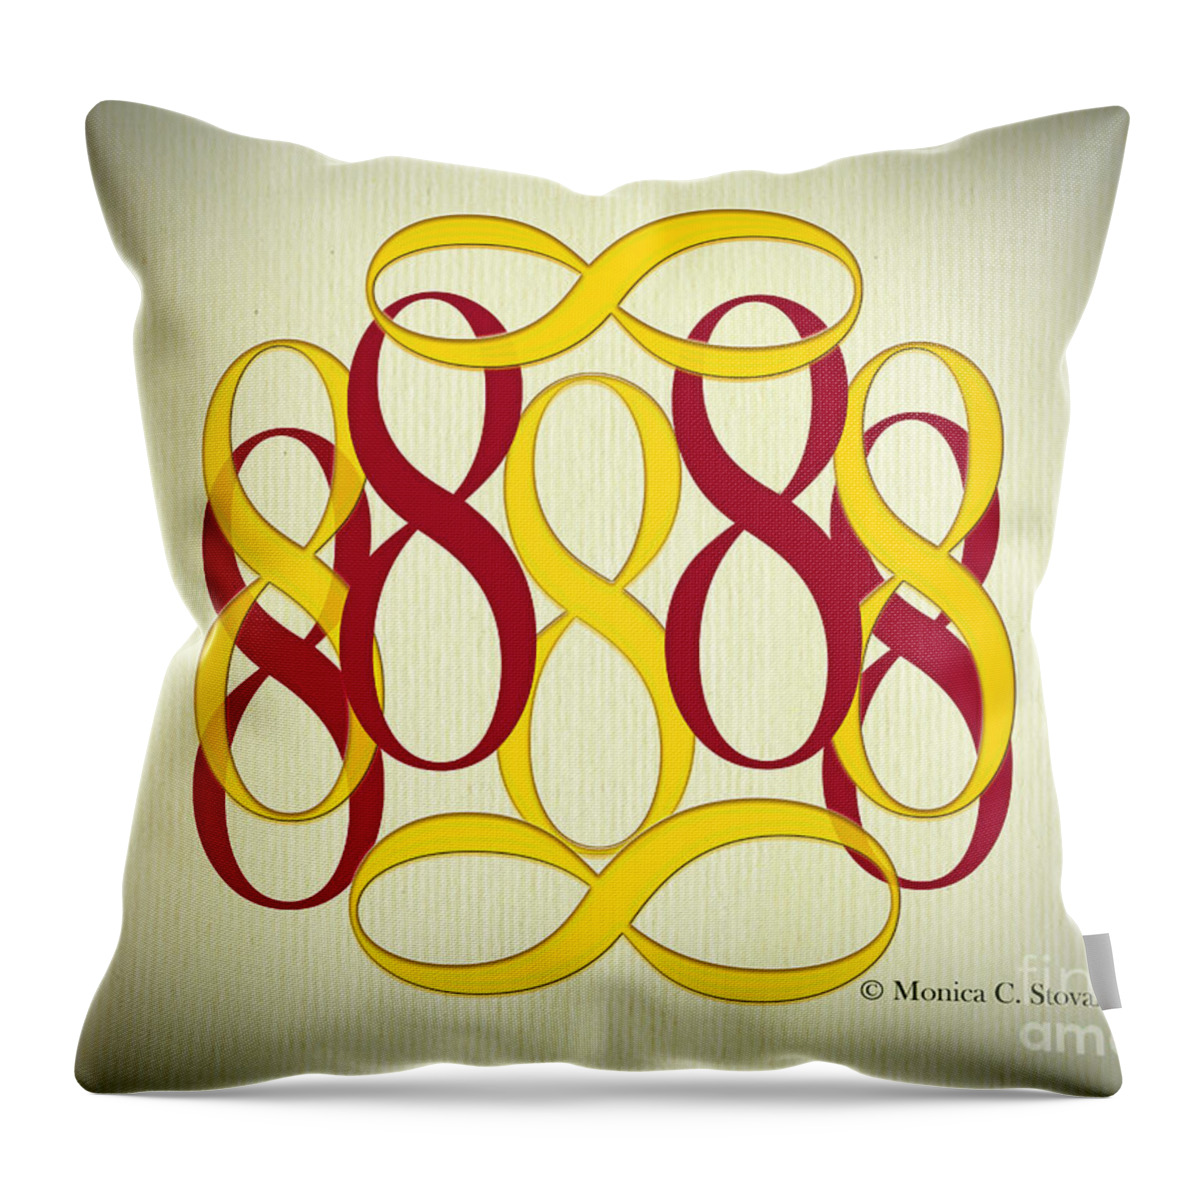 Yellow And Maroon 8's Design Throw Pillow featuring the digital art Yellow and Maroon 8's by Monica C Stovall